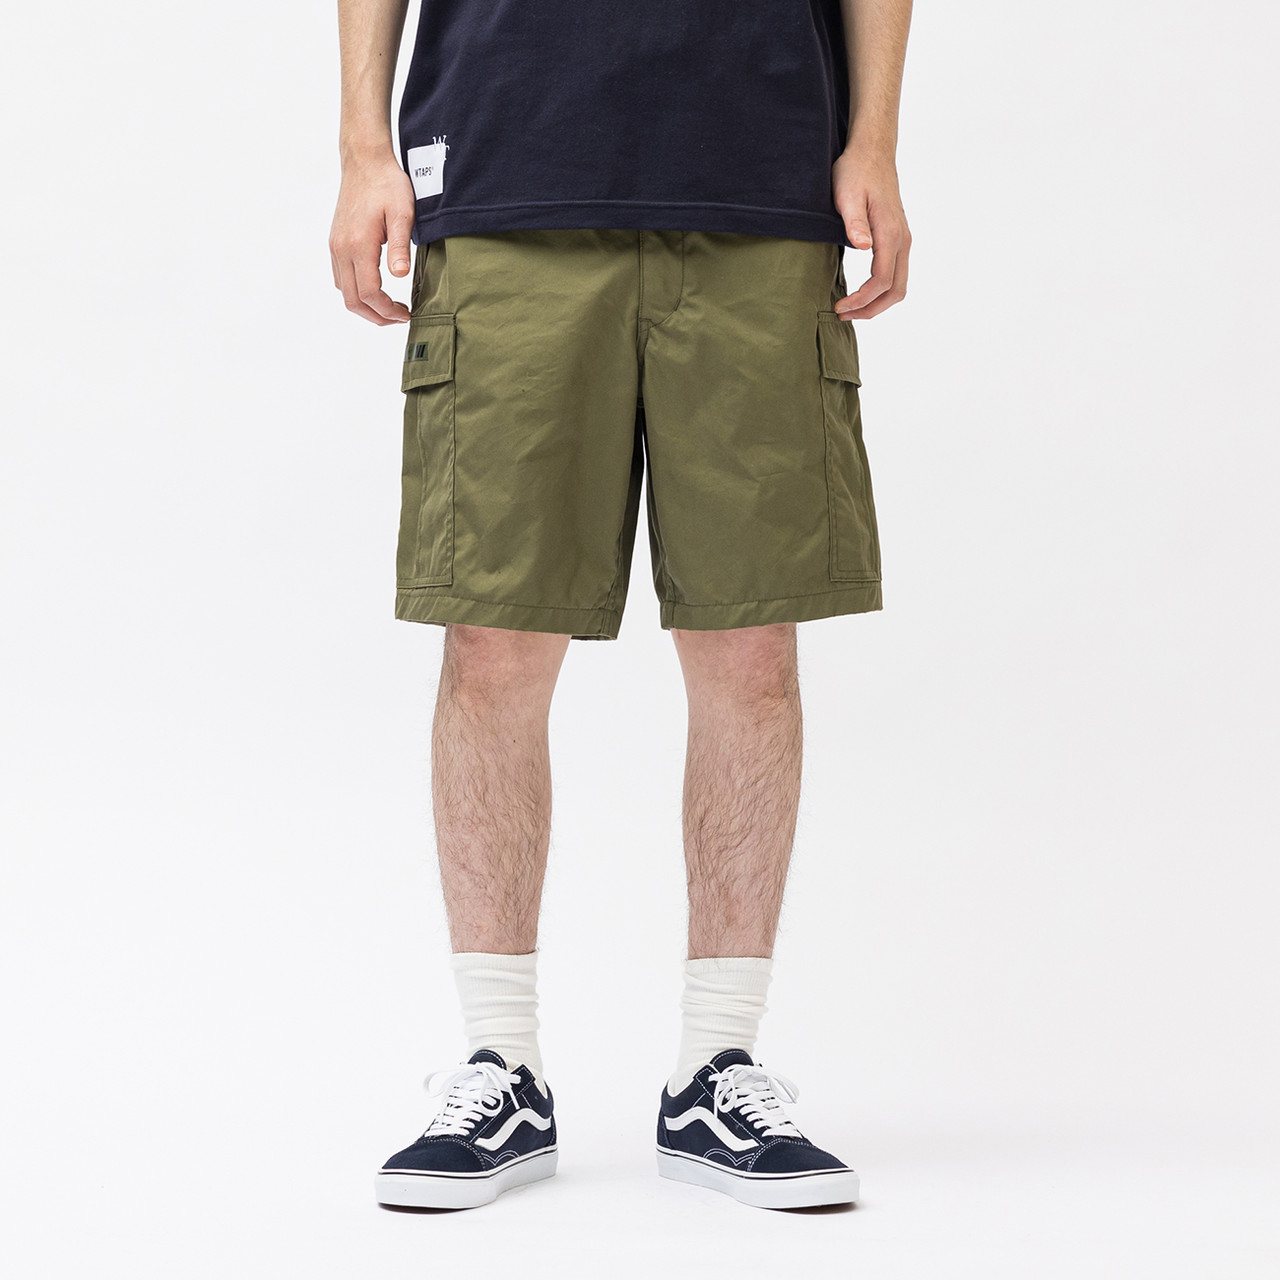 MILS0001 / SHORTS / NYCO. OXFORD 231WVDT-PTM06